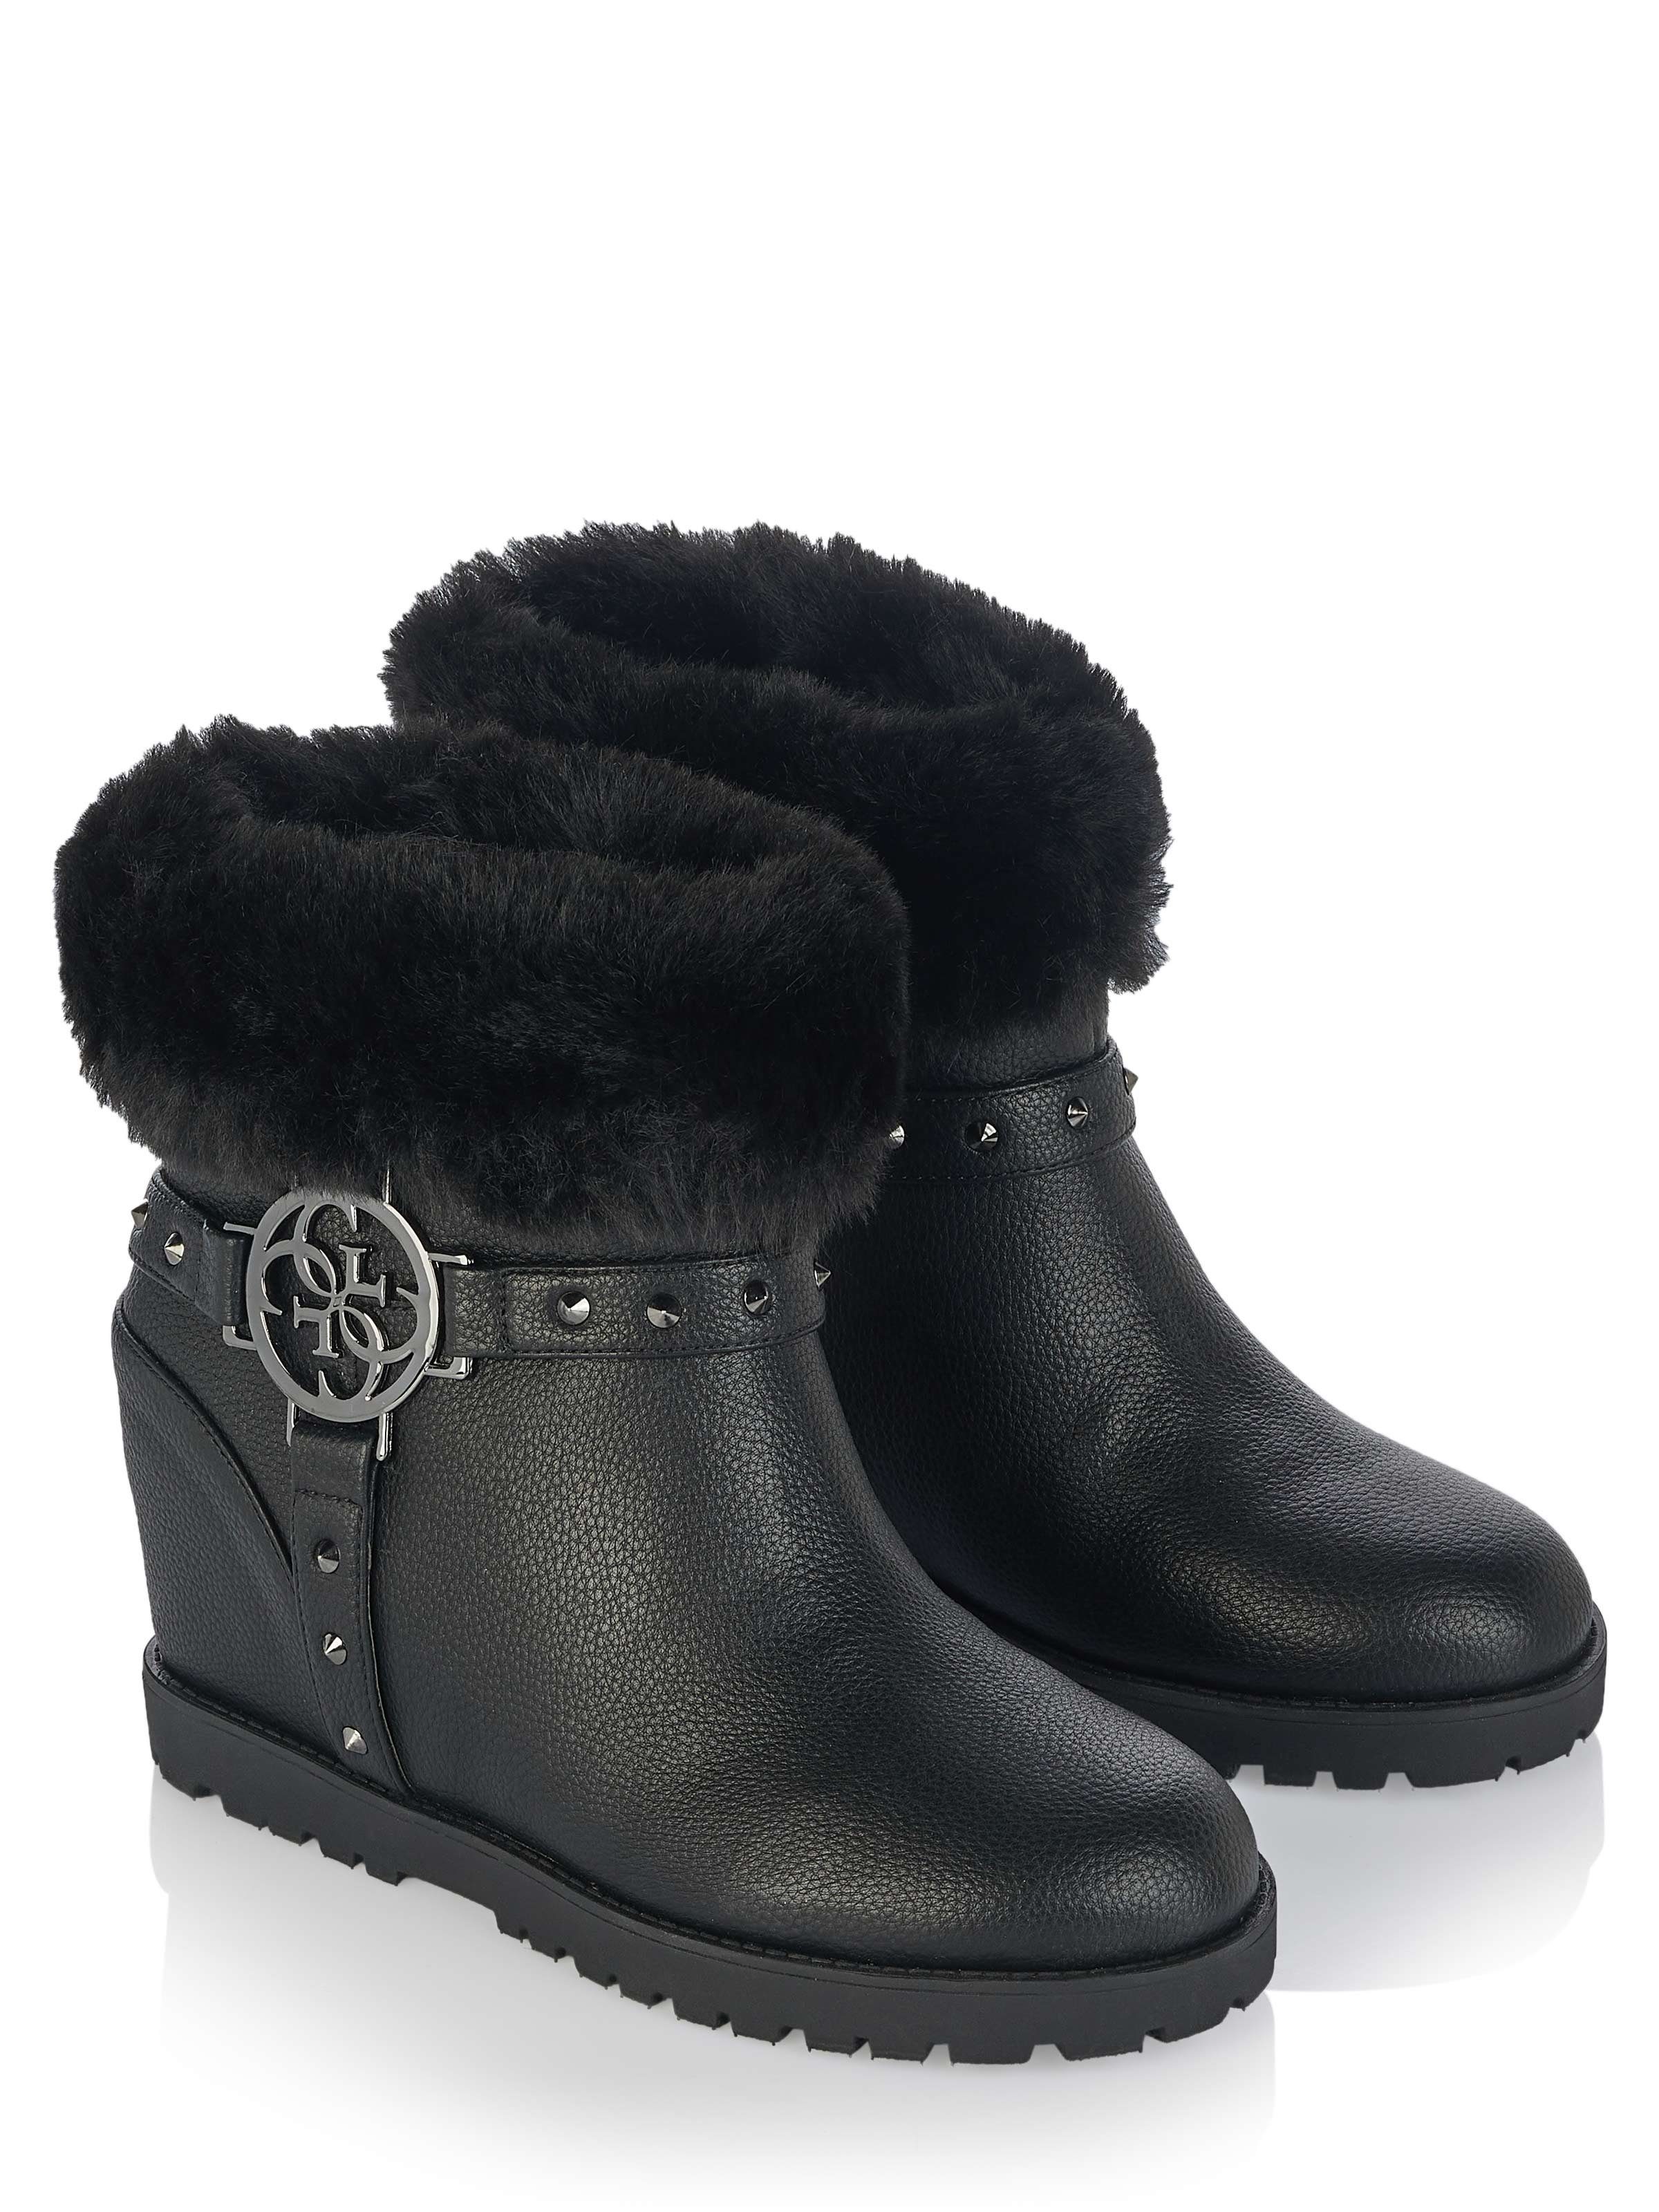 Ankleboots Guess Stiefel GUESS